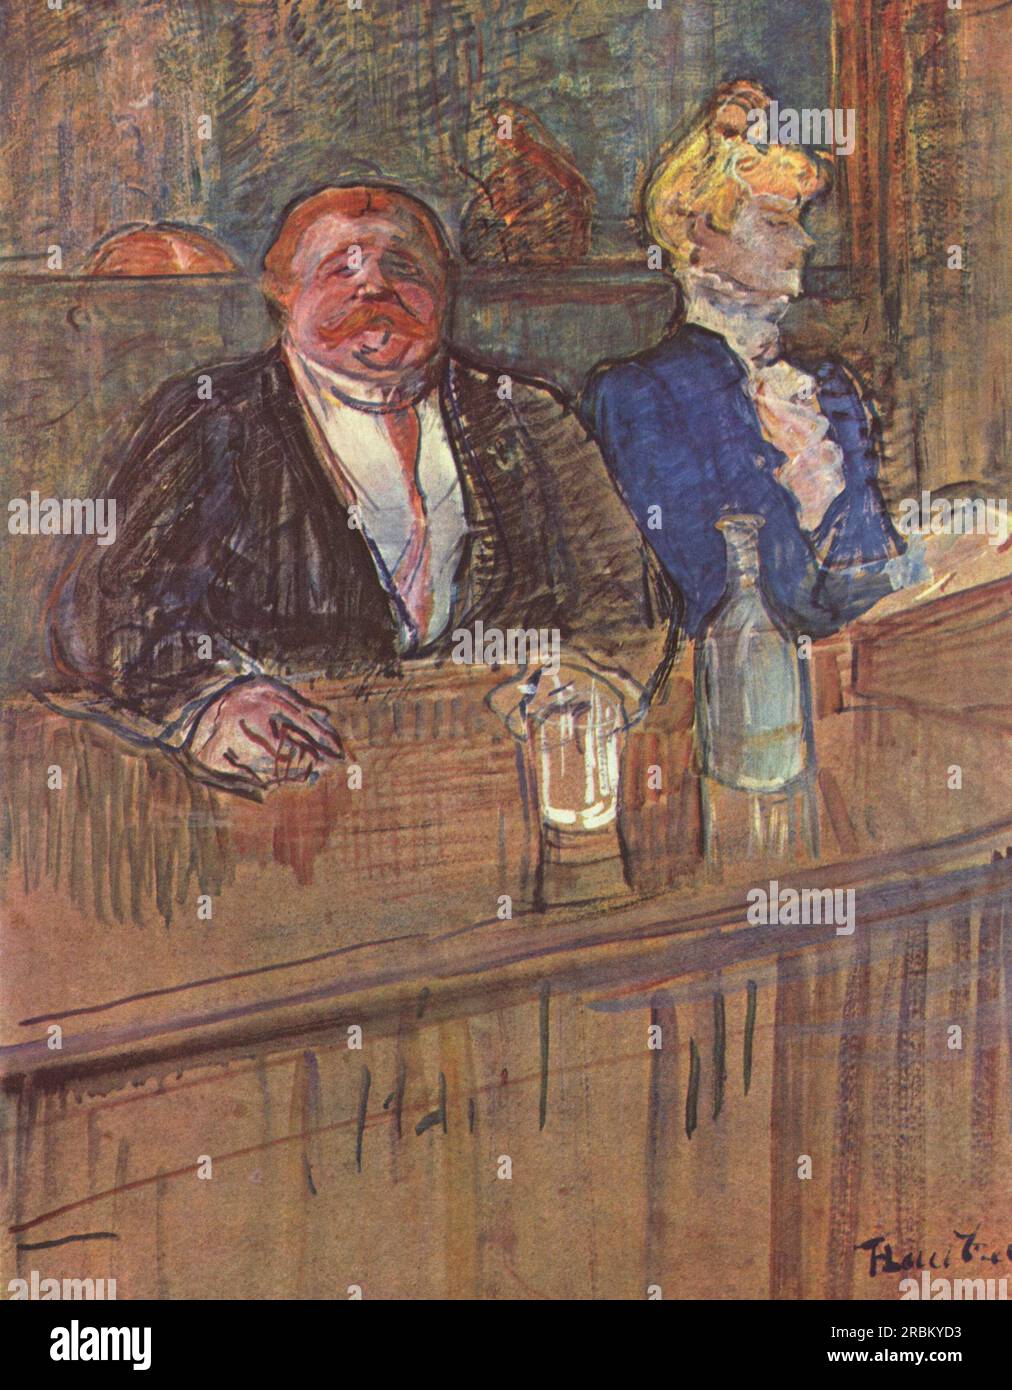 At the Cafe The Customer and the Anemic Cashier 1898 by Henri de Toulouse-Lautrec Stock Photo